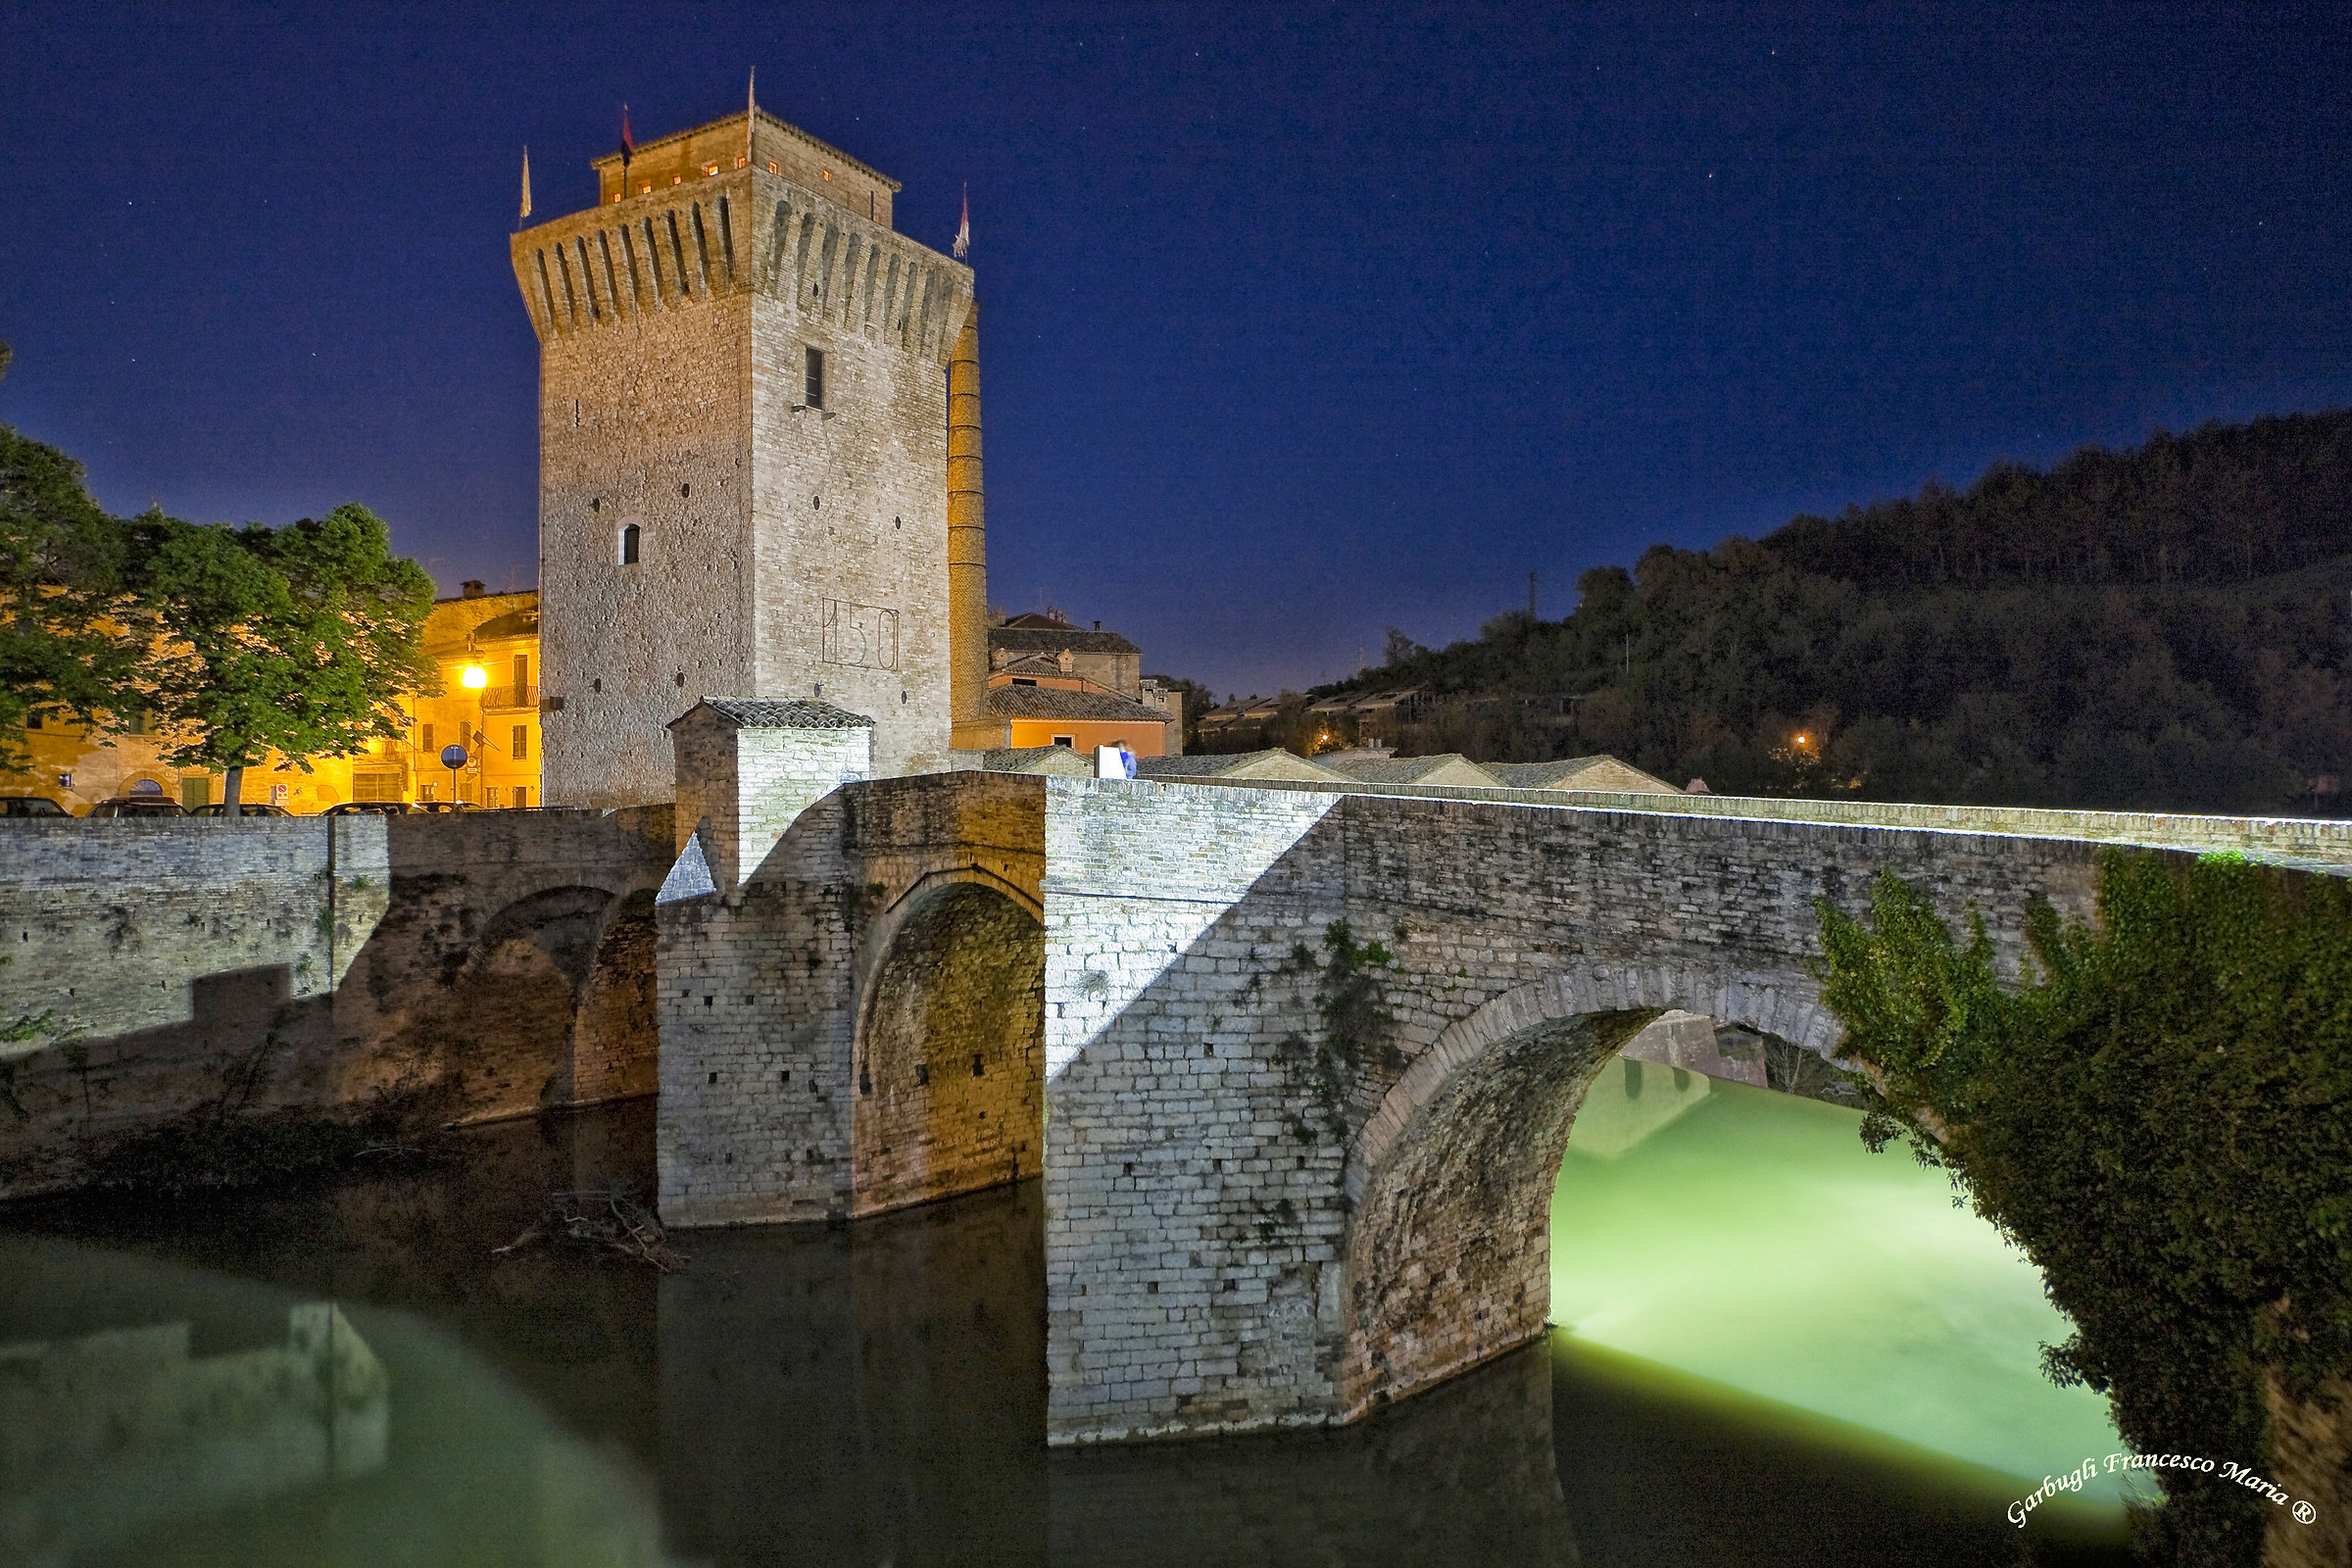 Now the Blue Bridge and the Tower of Fermignano...